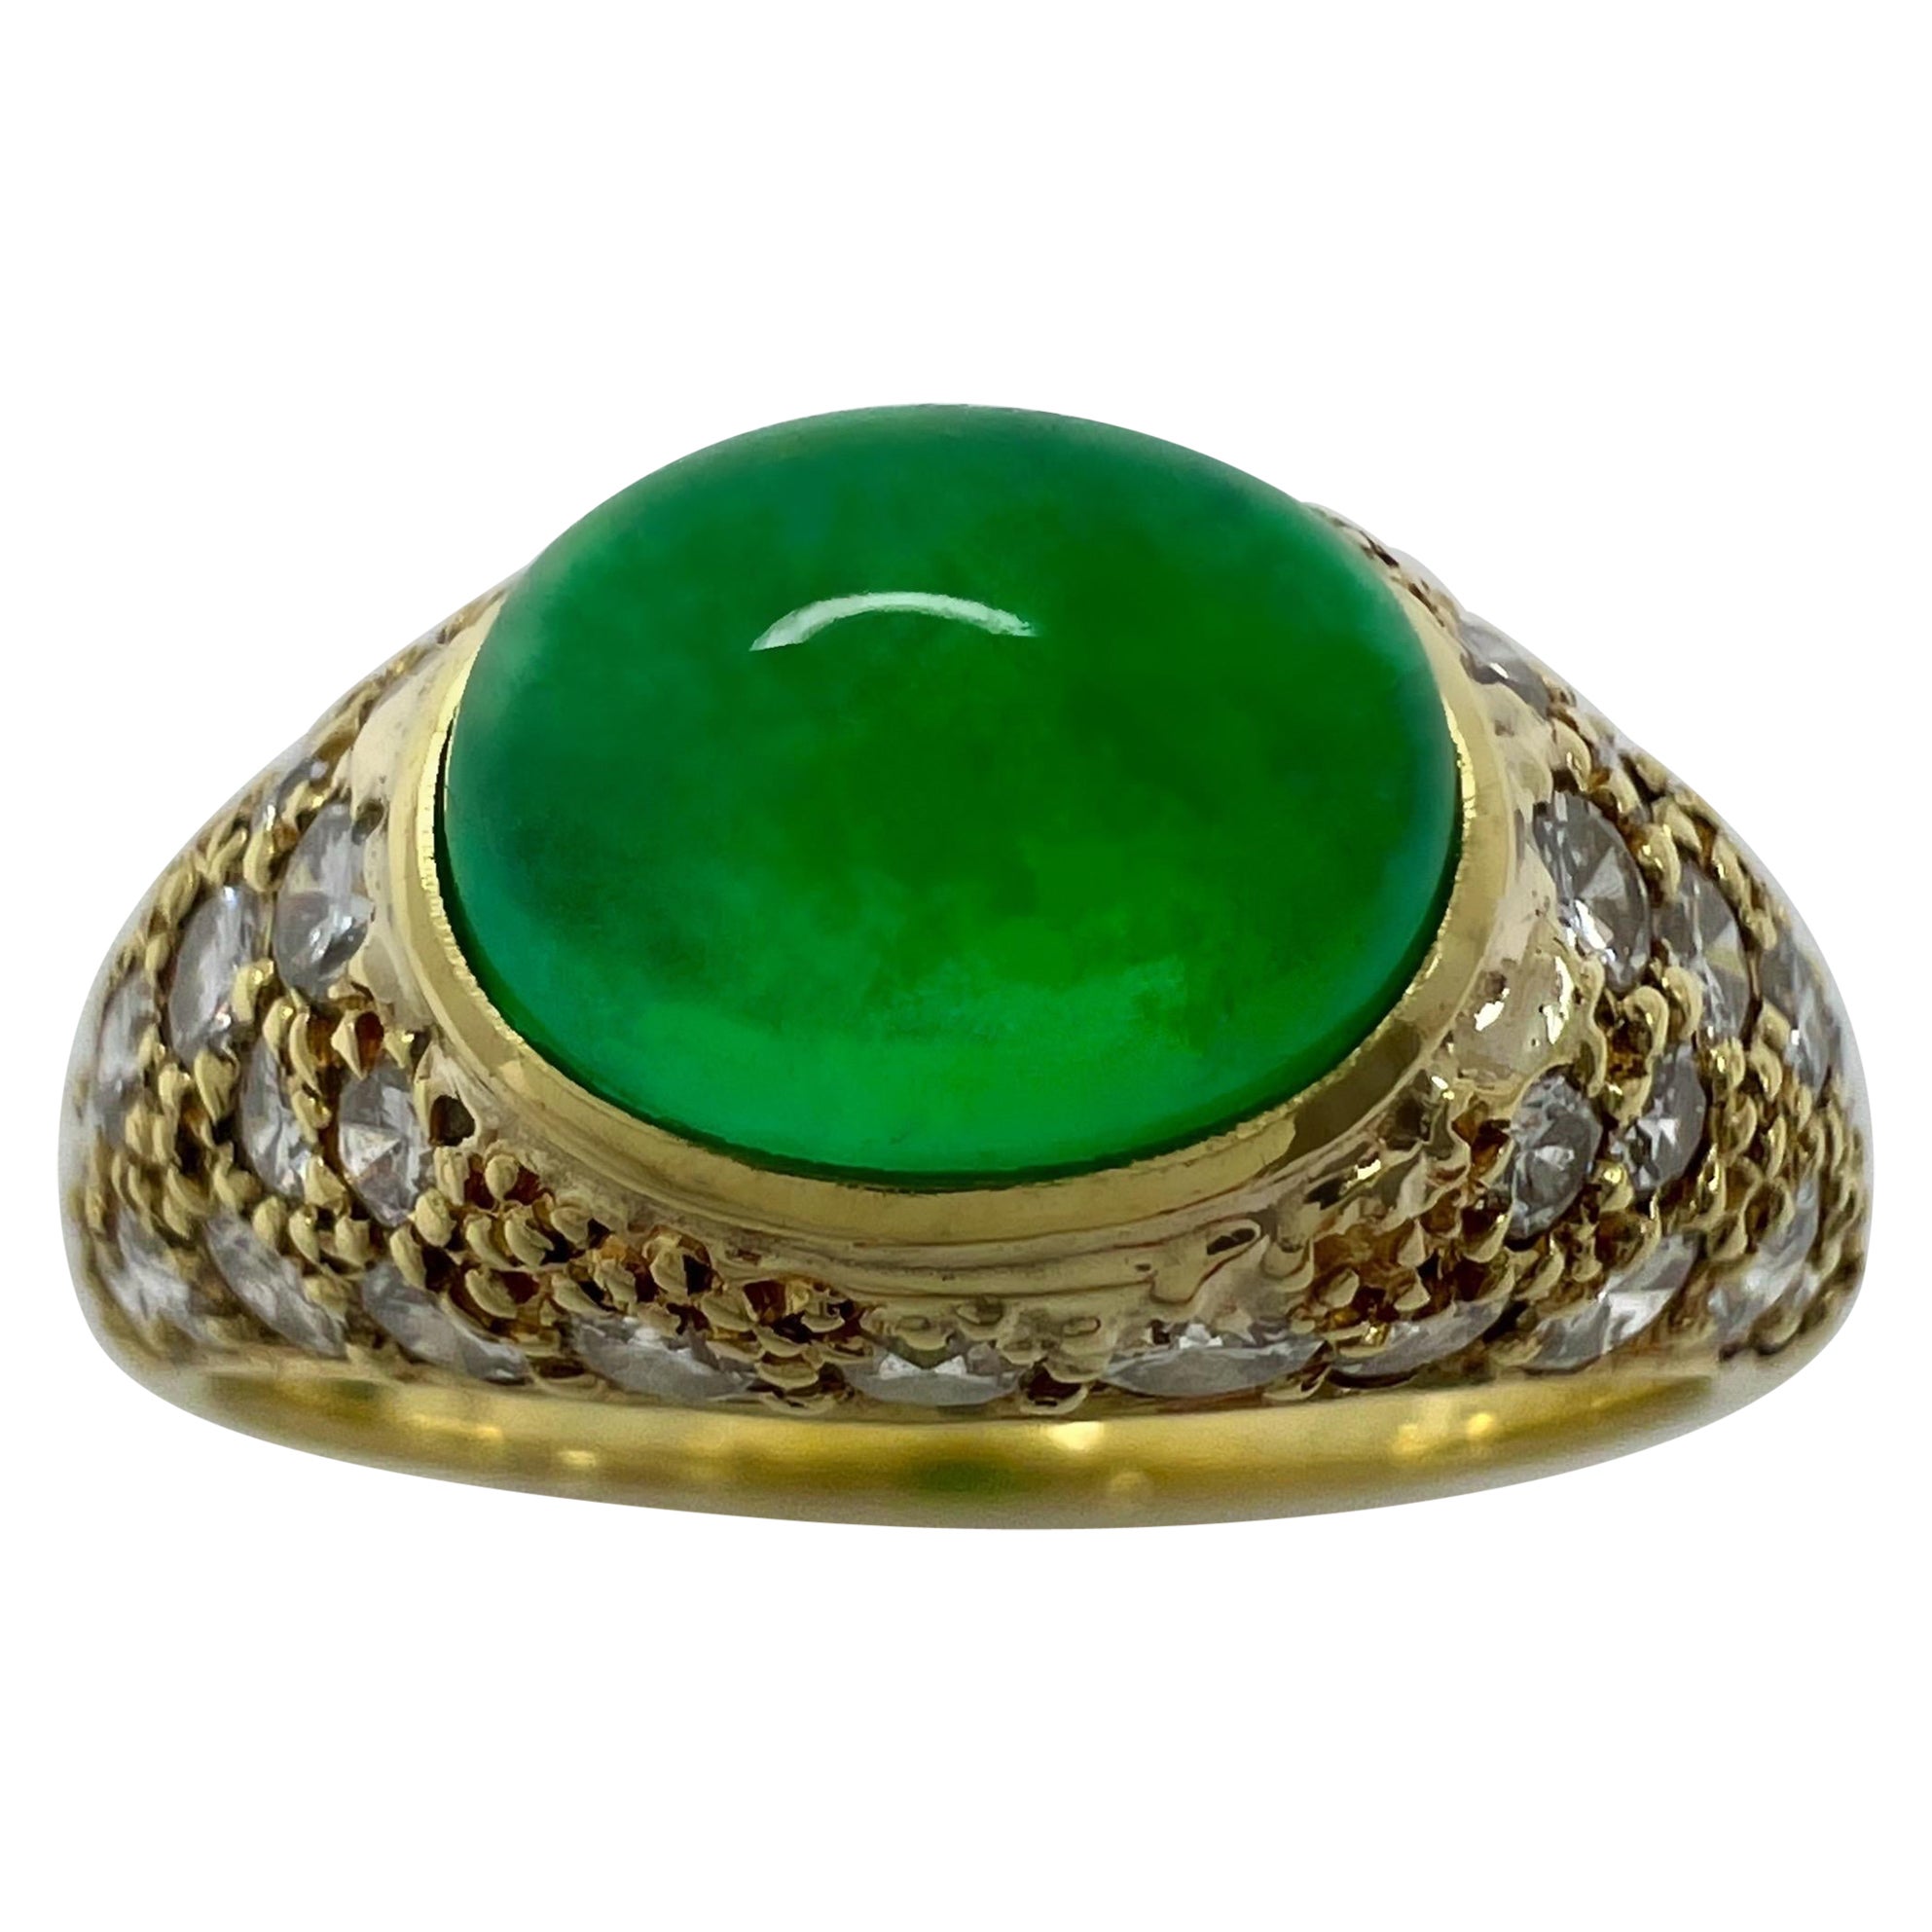 Rare Vintage Van Cleef & Arpels 2 Carat Emerald And Diamond Cocktail Dome Ring For Sale